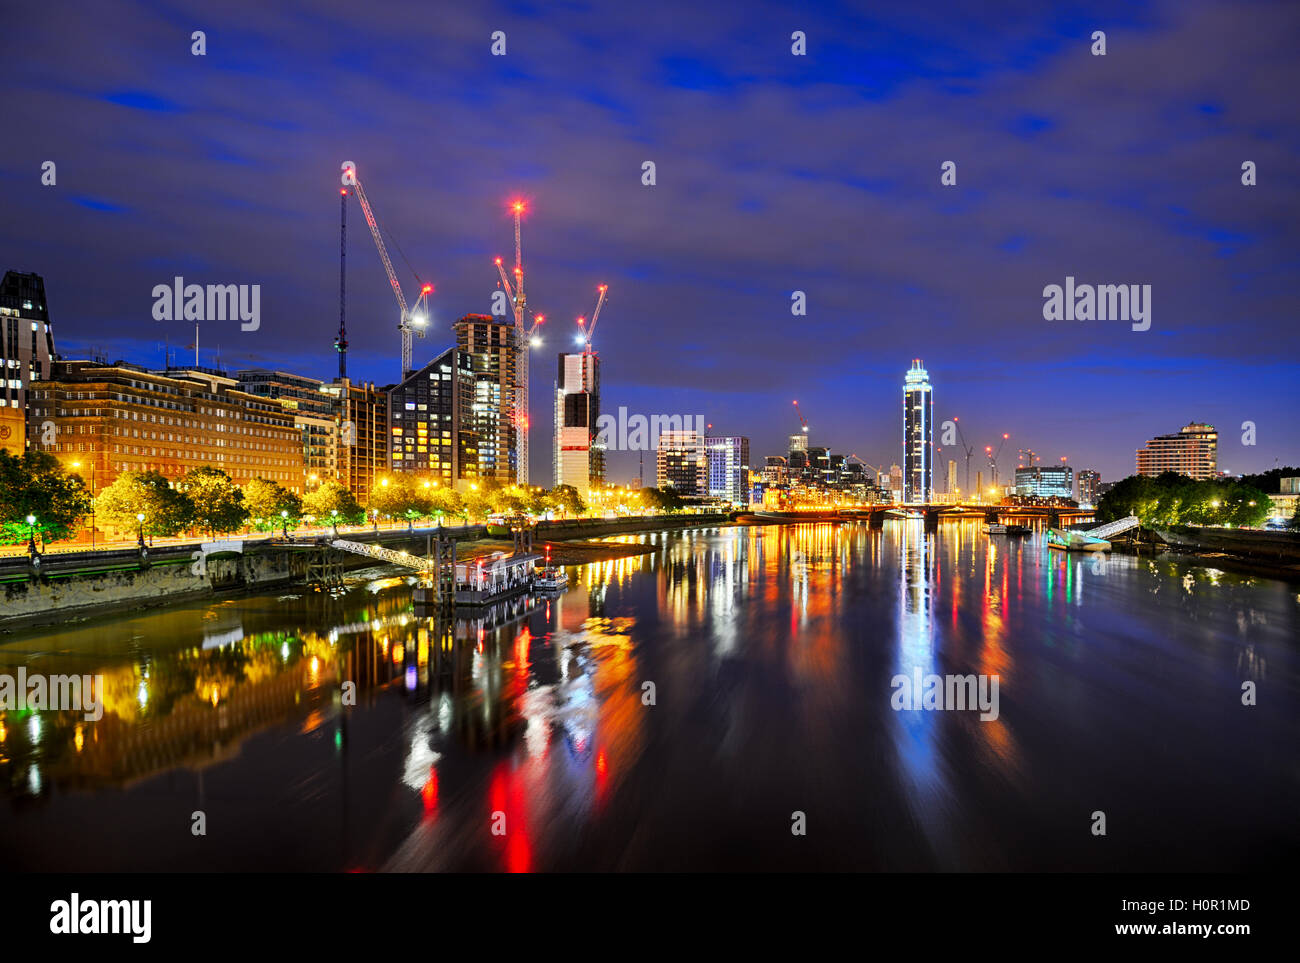 View of London at night from Lambeth Bridge showing St Georges Wharf and St Georges Tower cranes and River Thames Stock Photo